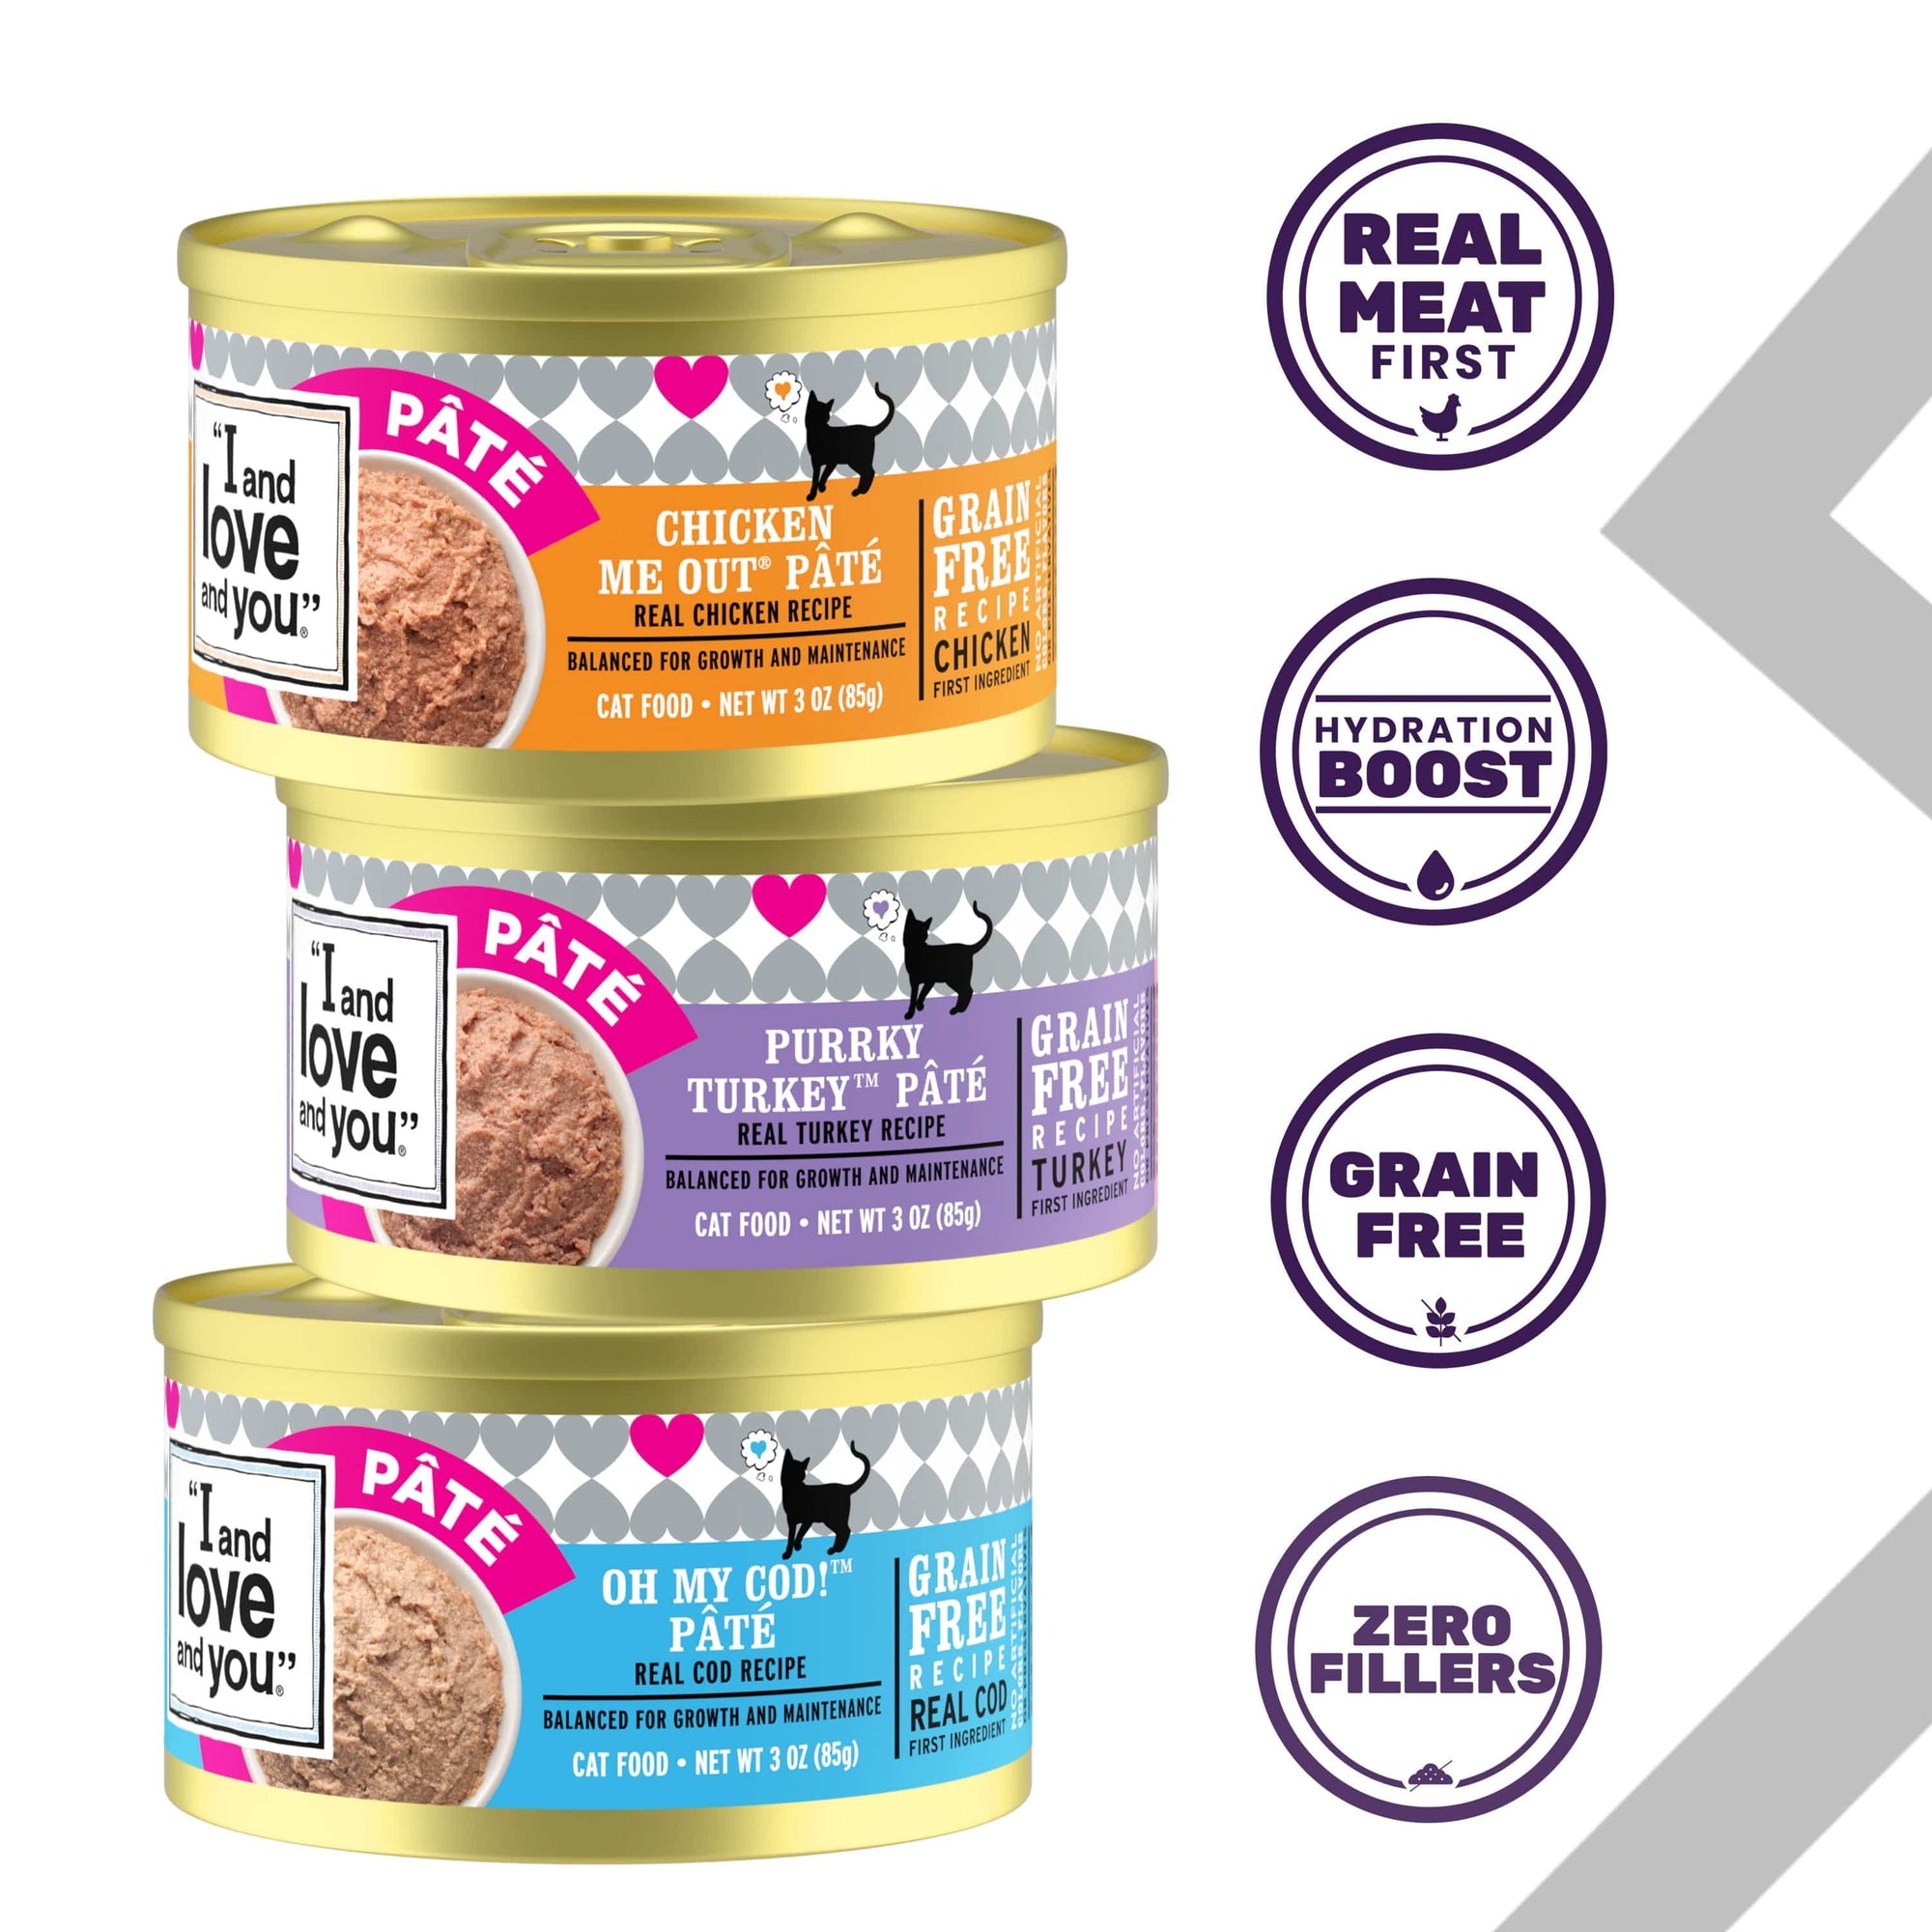 A group of cans of cat food including Oh My Cod!, Purrky Turkey, and Chicken Me Out from the Original Recipe - Cat Can Variety Pack - Pâté All Day showcasing product features such as real meat first, hydration boost, grain free and zero fillers.